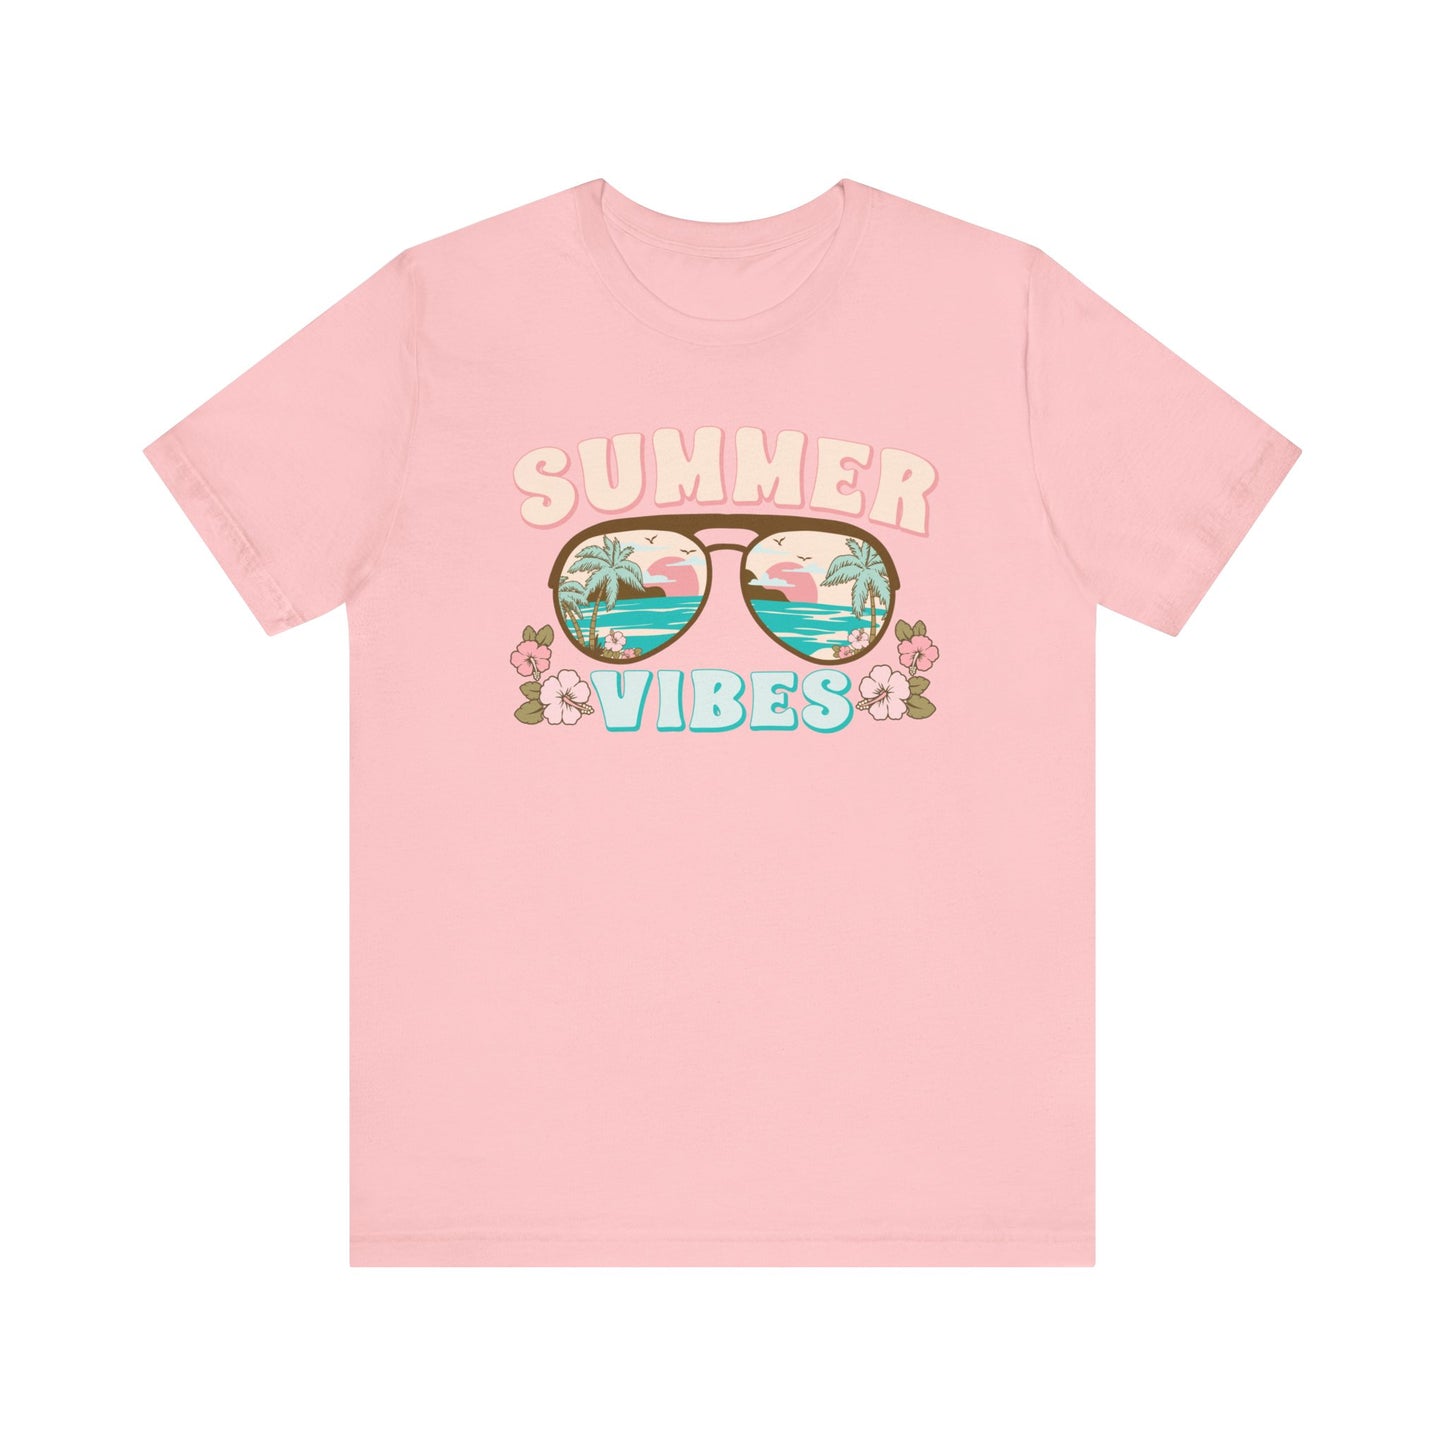 Vintage Style Summer Vibes T-Shirt with Tropical Sunglasses Print, Unisex Beach Tee, Casual Vacation Clothing, Palm Trees Graphic Shirt